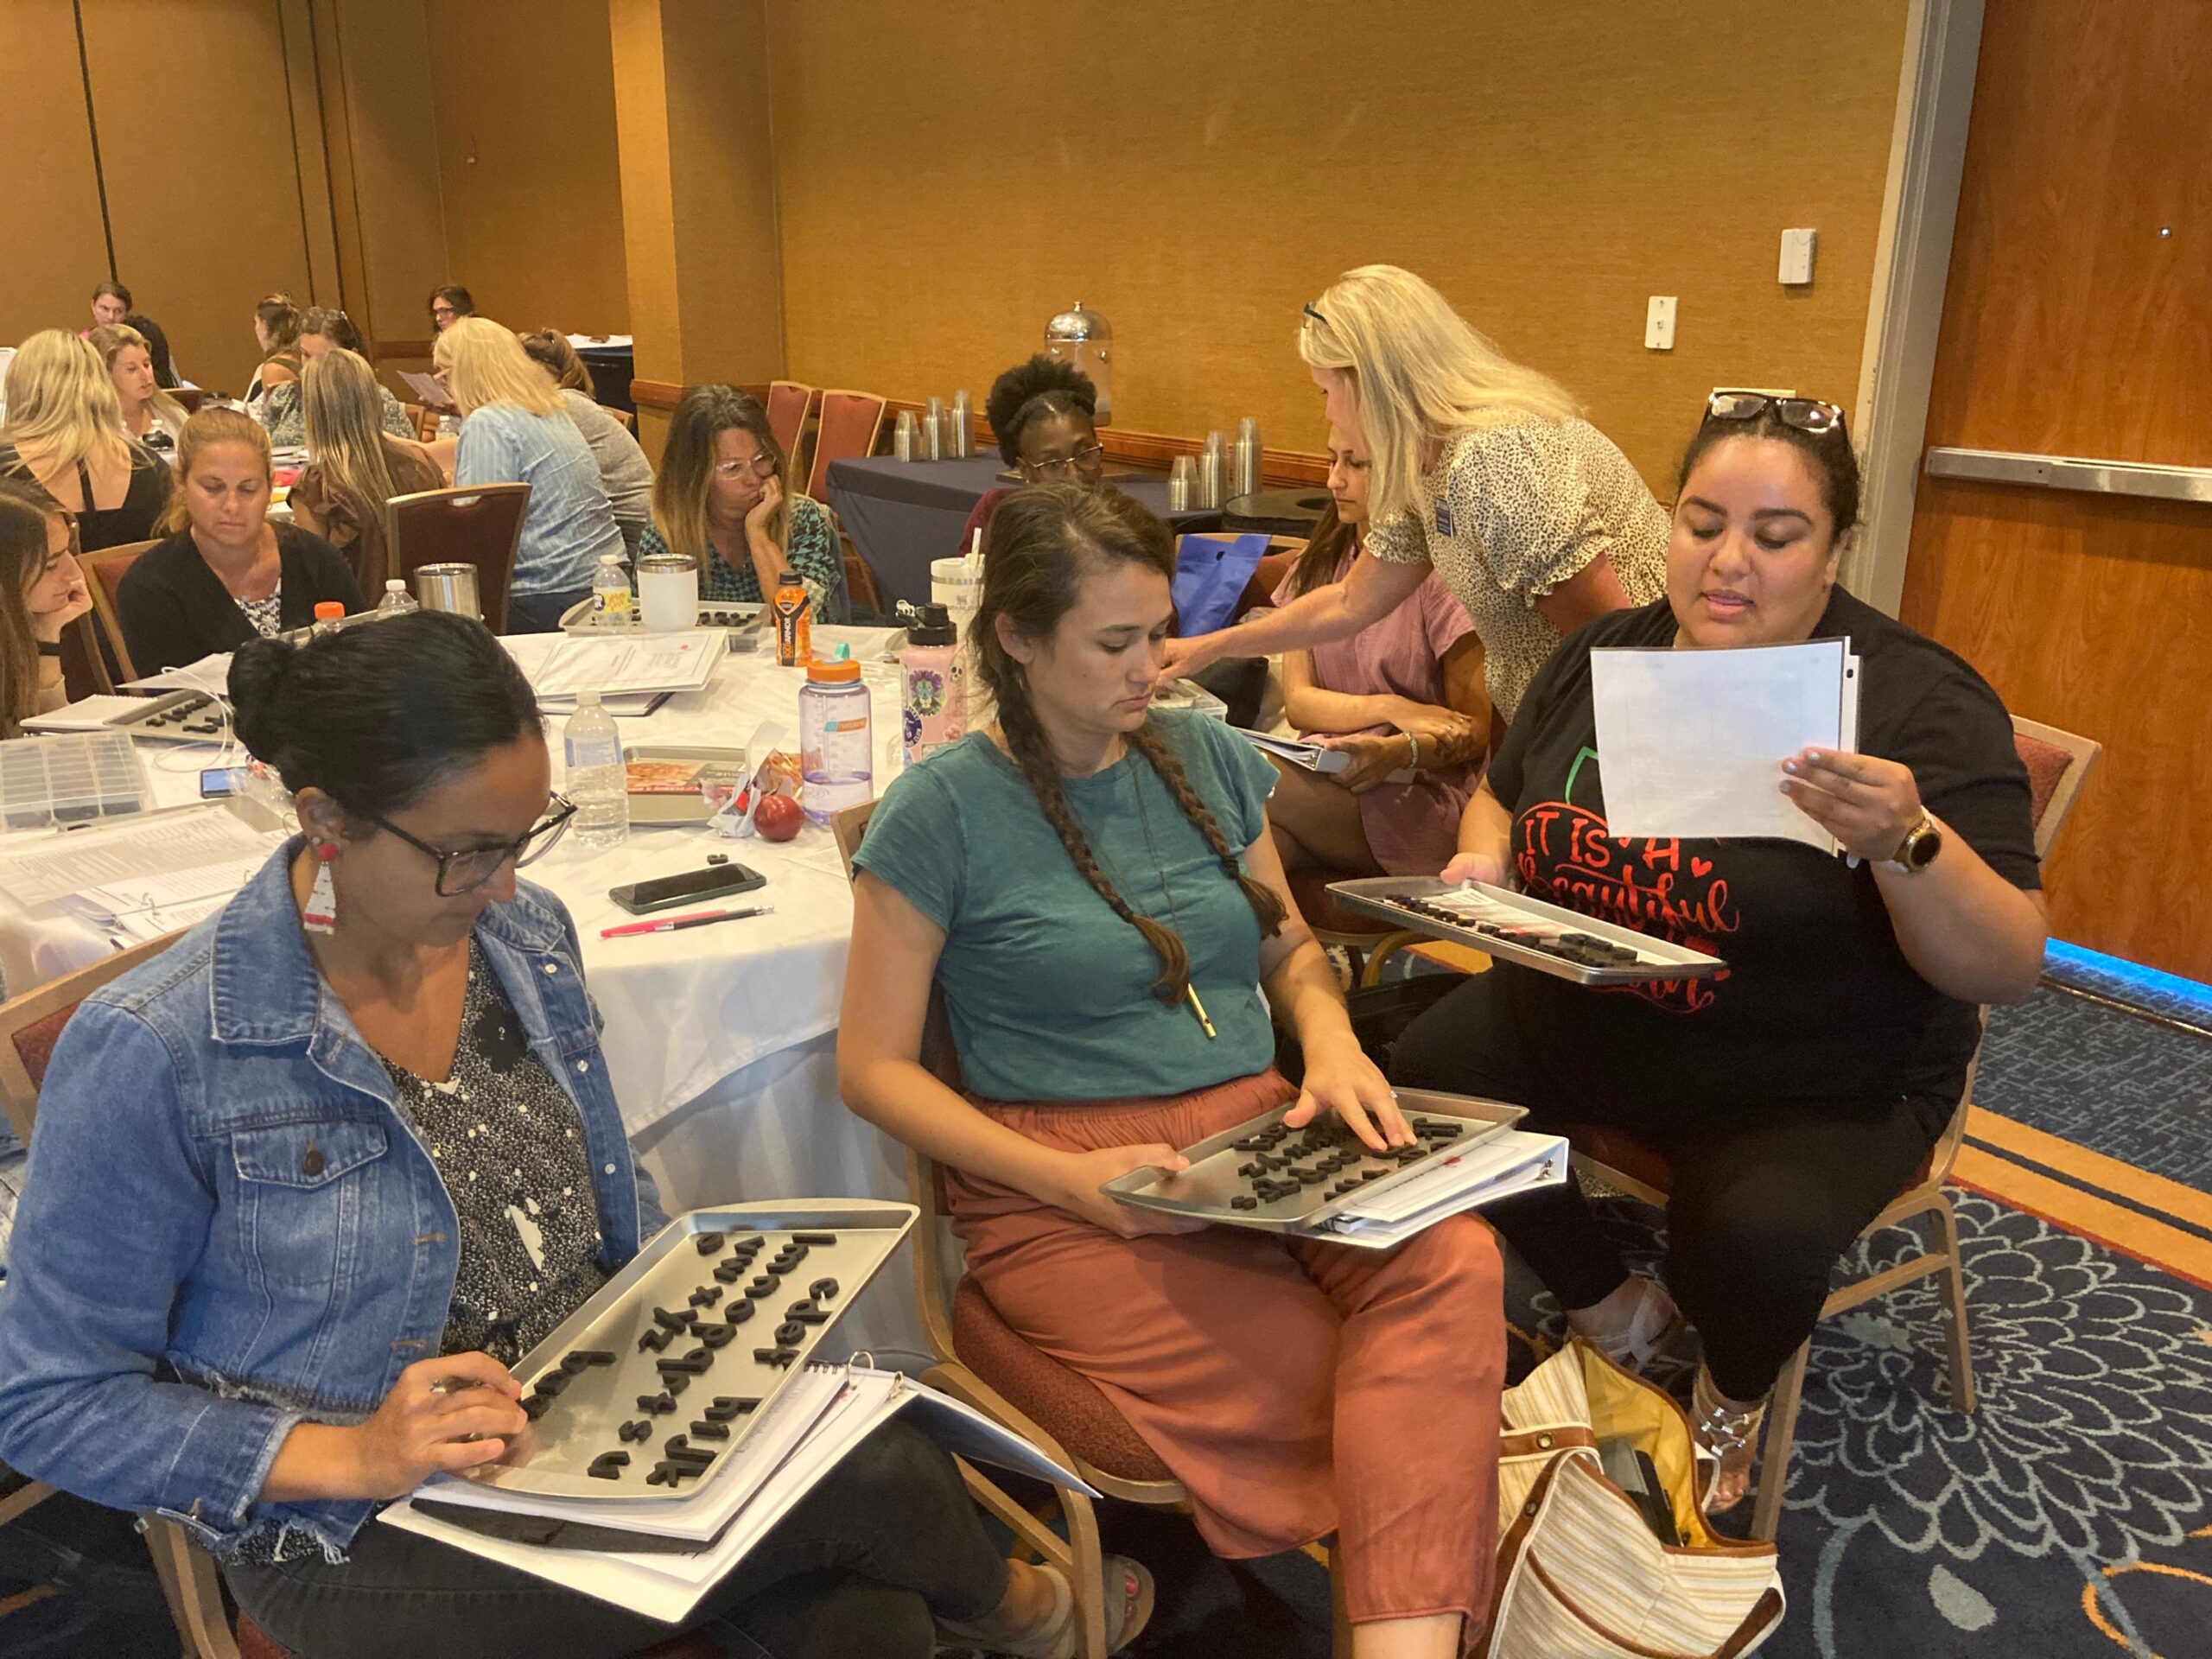 Three teachers sit together at a round table and practice with manipulative letters - a teaching practice to help developing readers learn common sounds and word patterns.